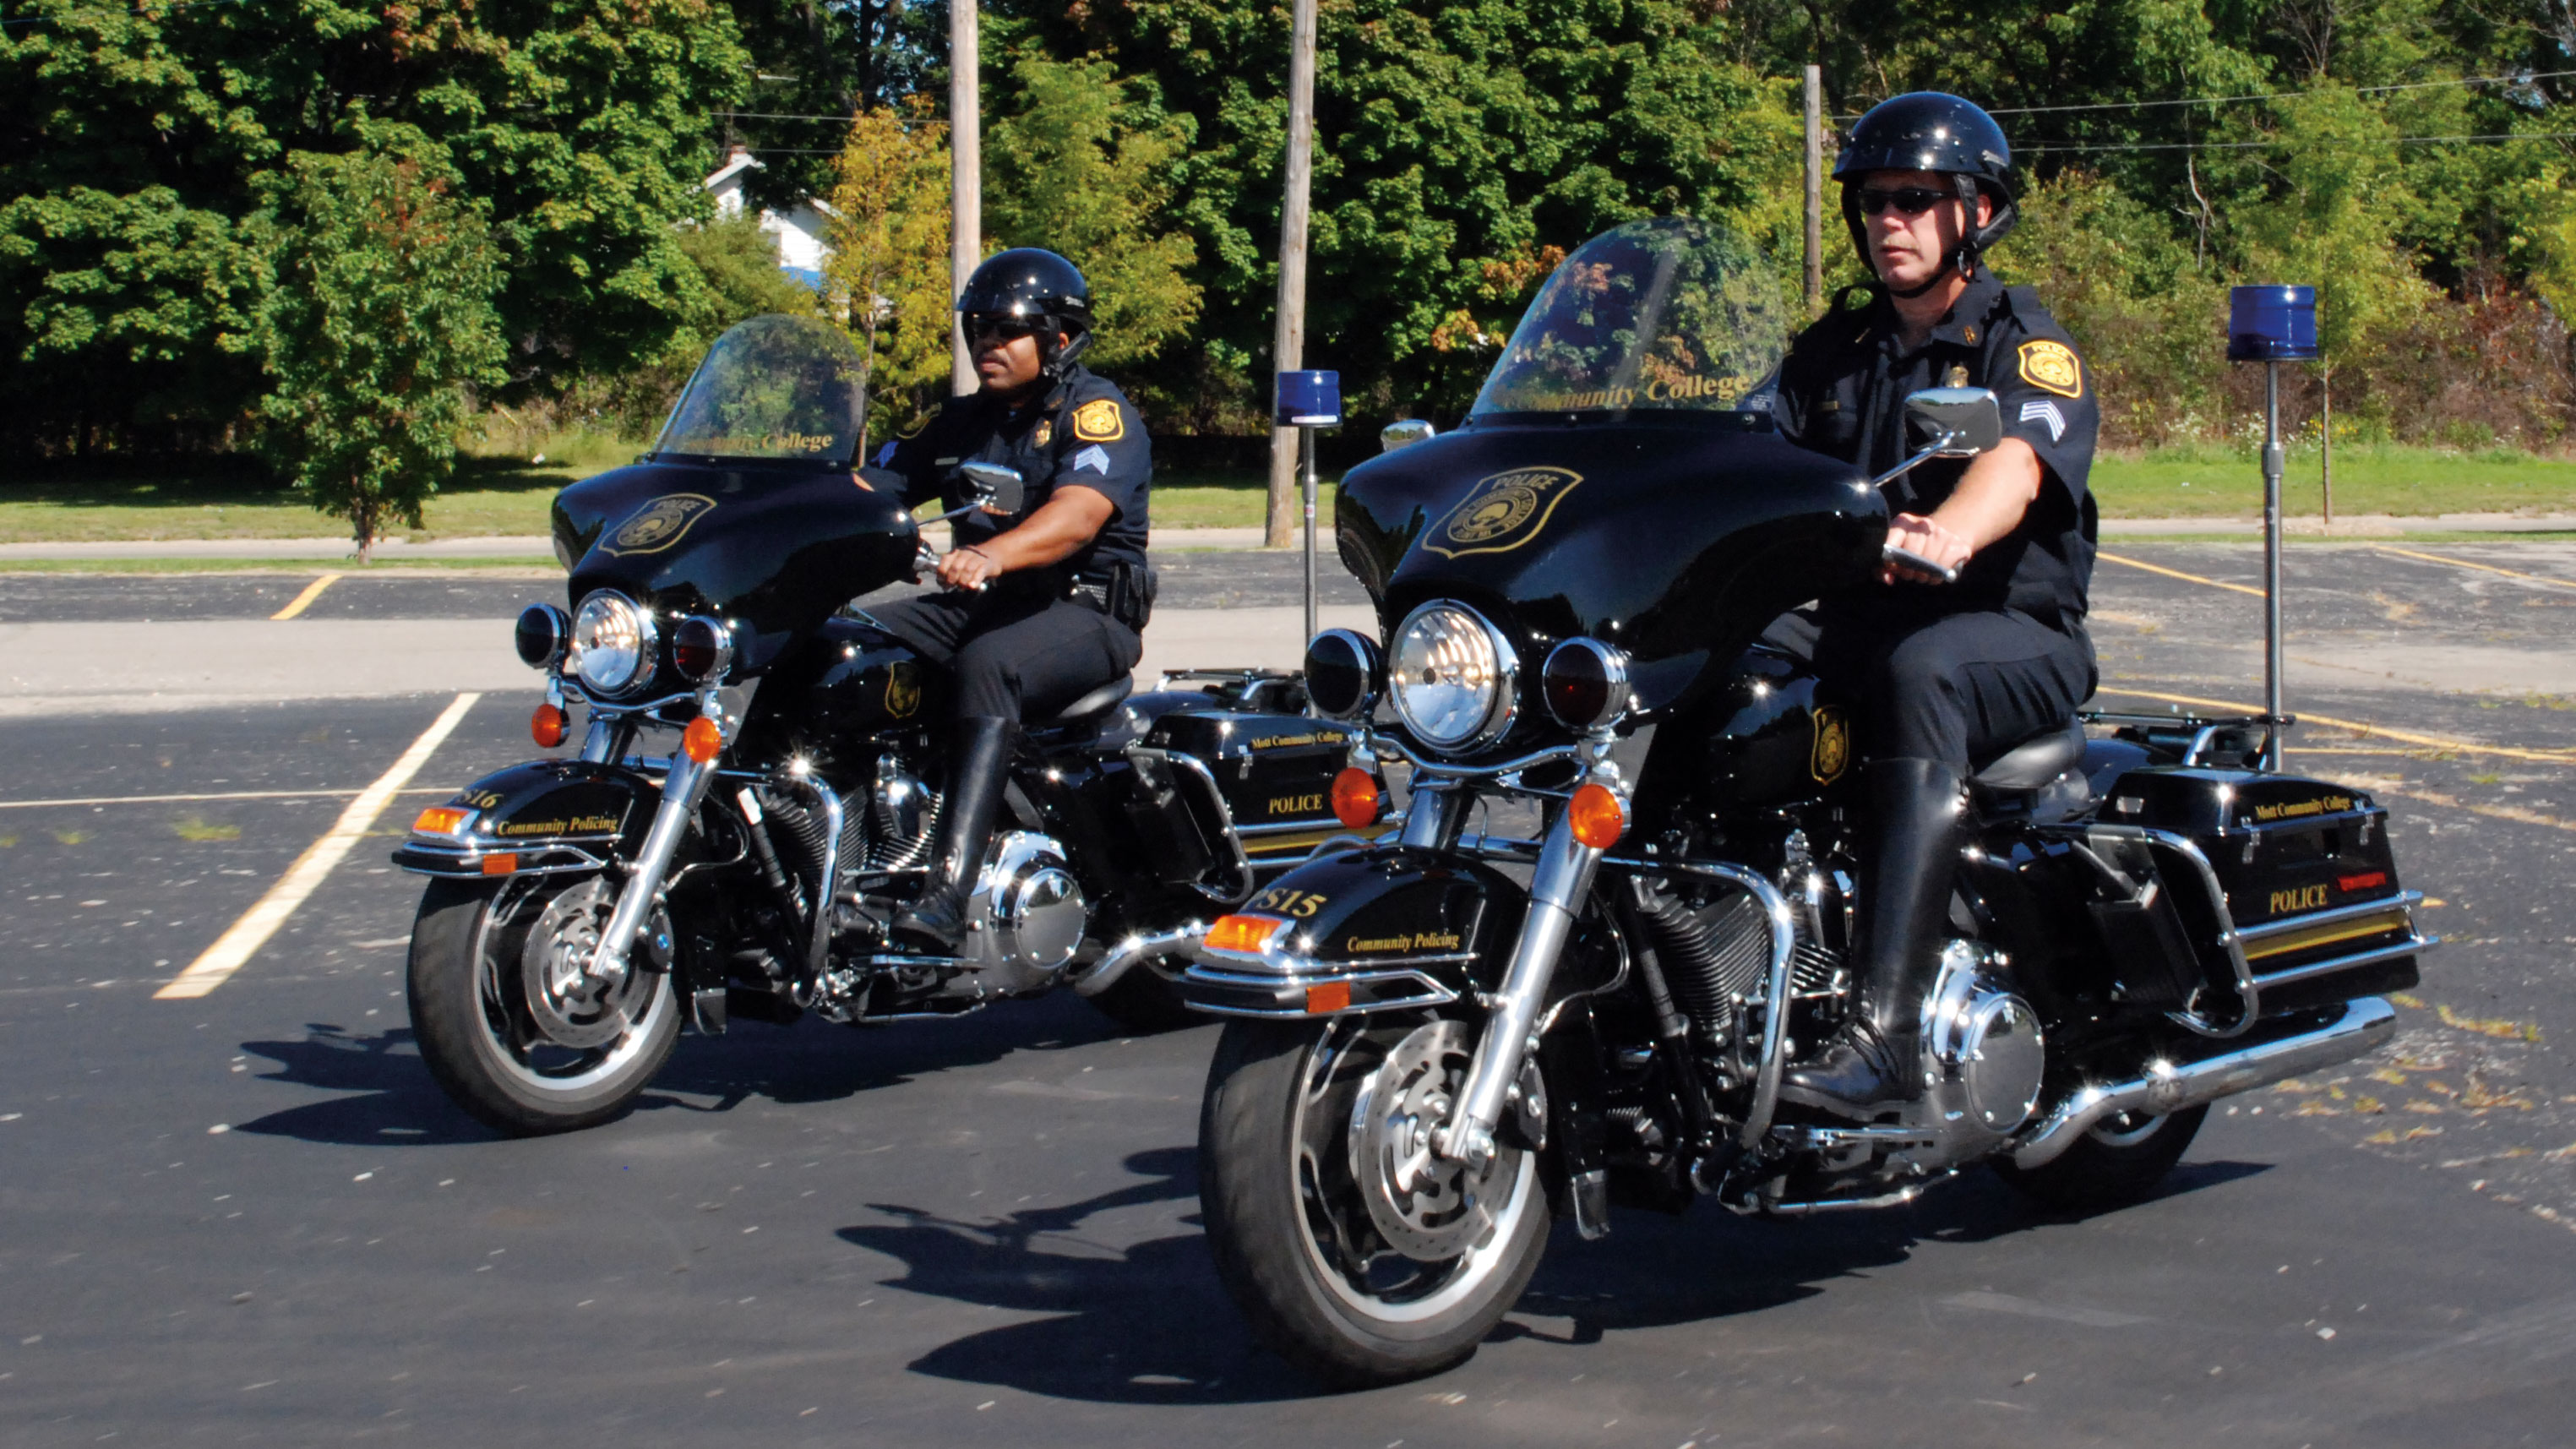 Department of Public Safety Motorcycle Patrol